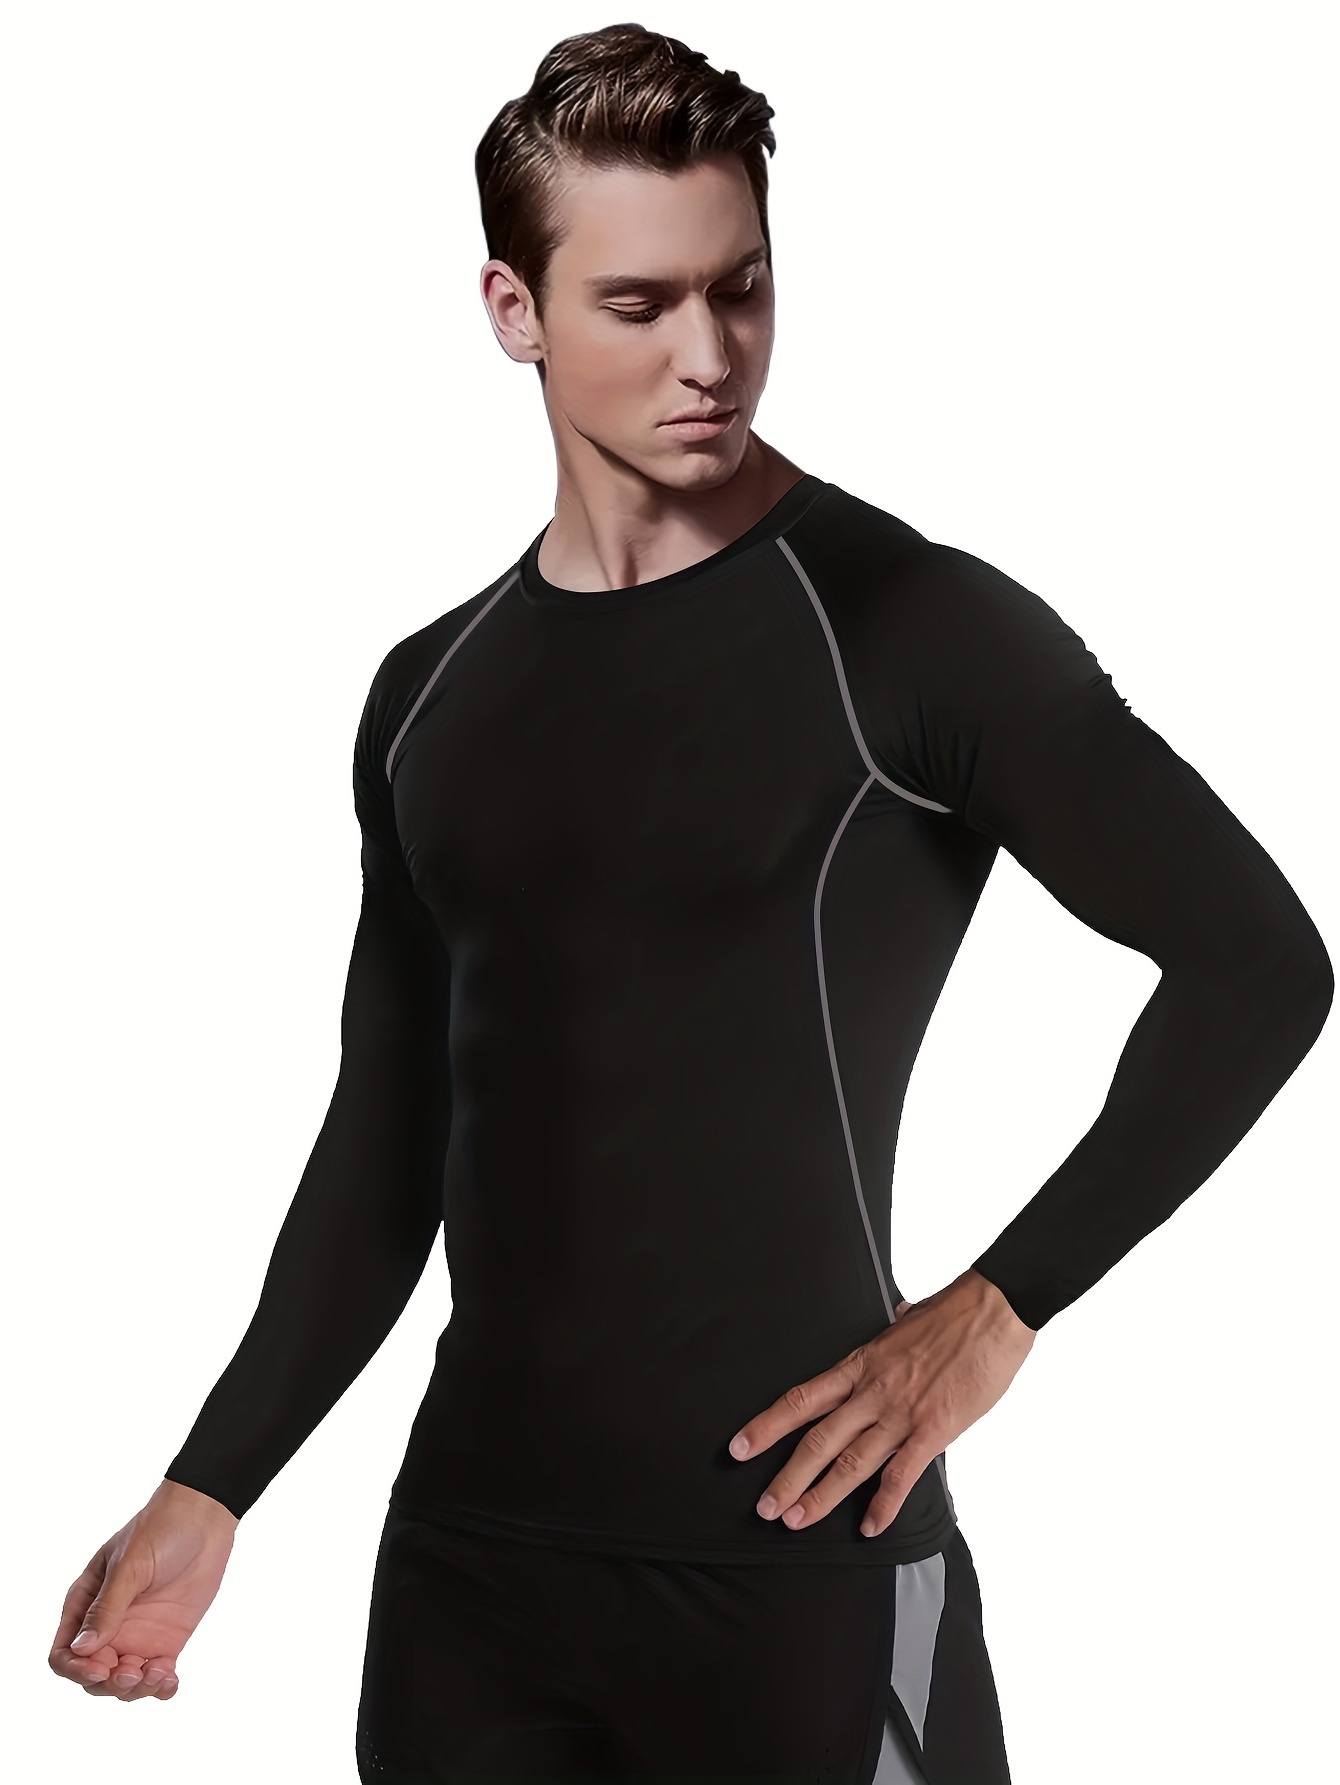 Running Turtleneck T-shirt Men Gym Sportswear Fitness Tight Long Sleeve Compression  Shirt Jogging Quick Dry Exercise Clothing